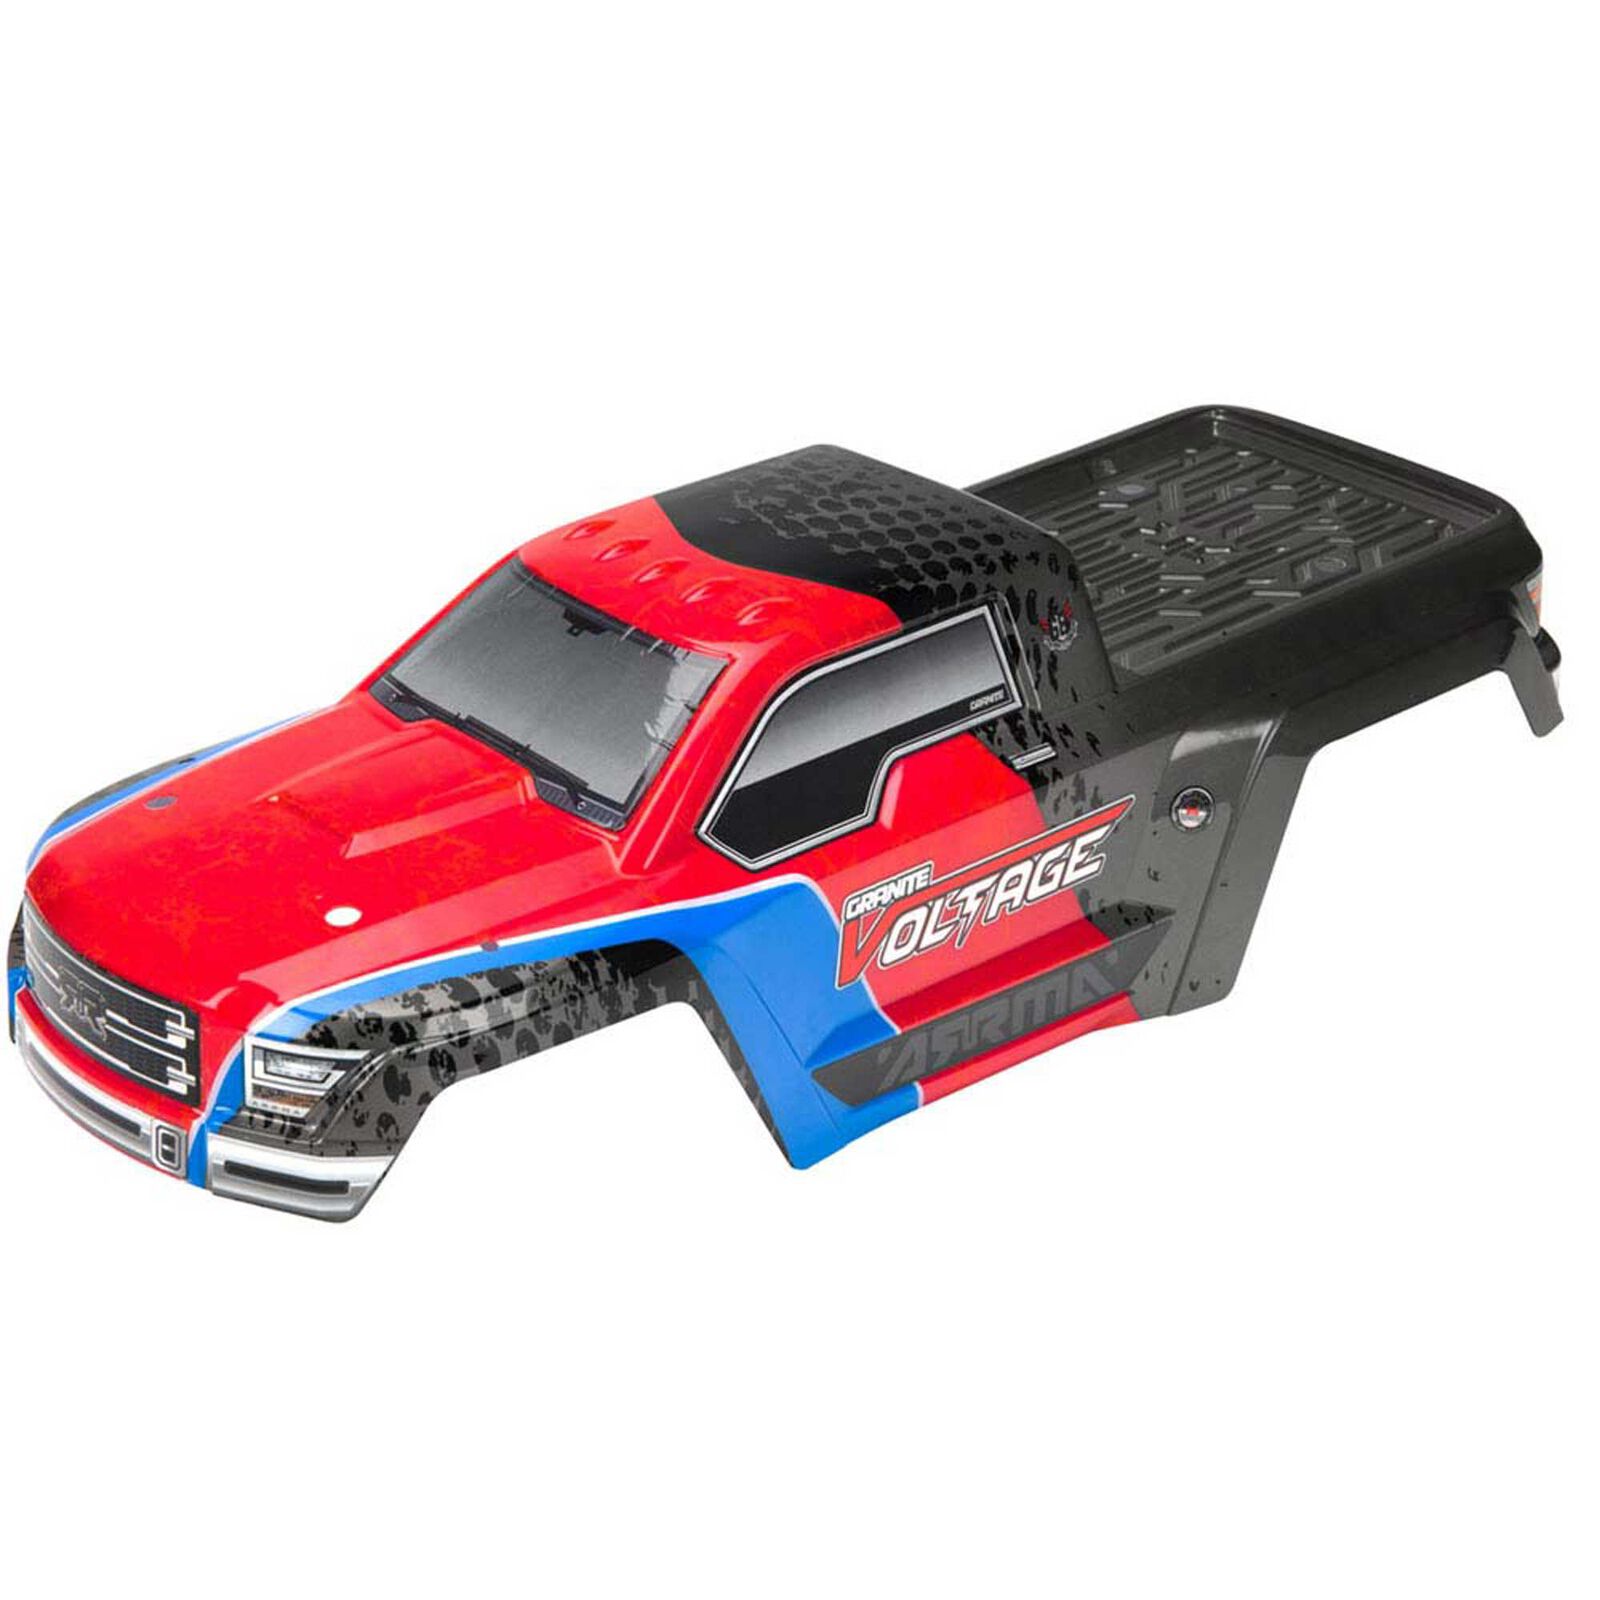 1/10 Painted Body with Decals, Red/Black: GRANITE VOLTAGE